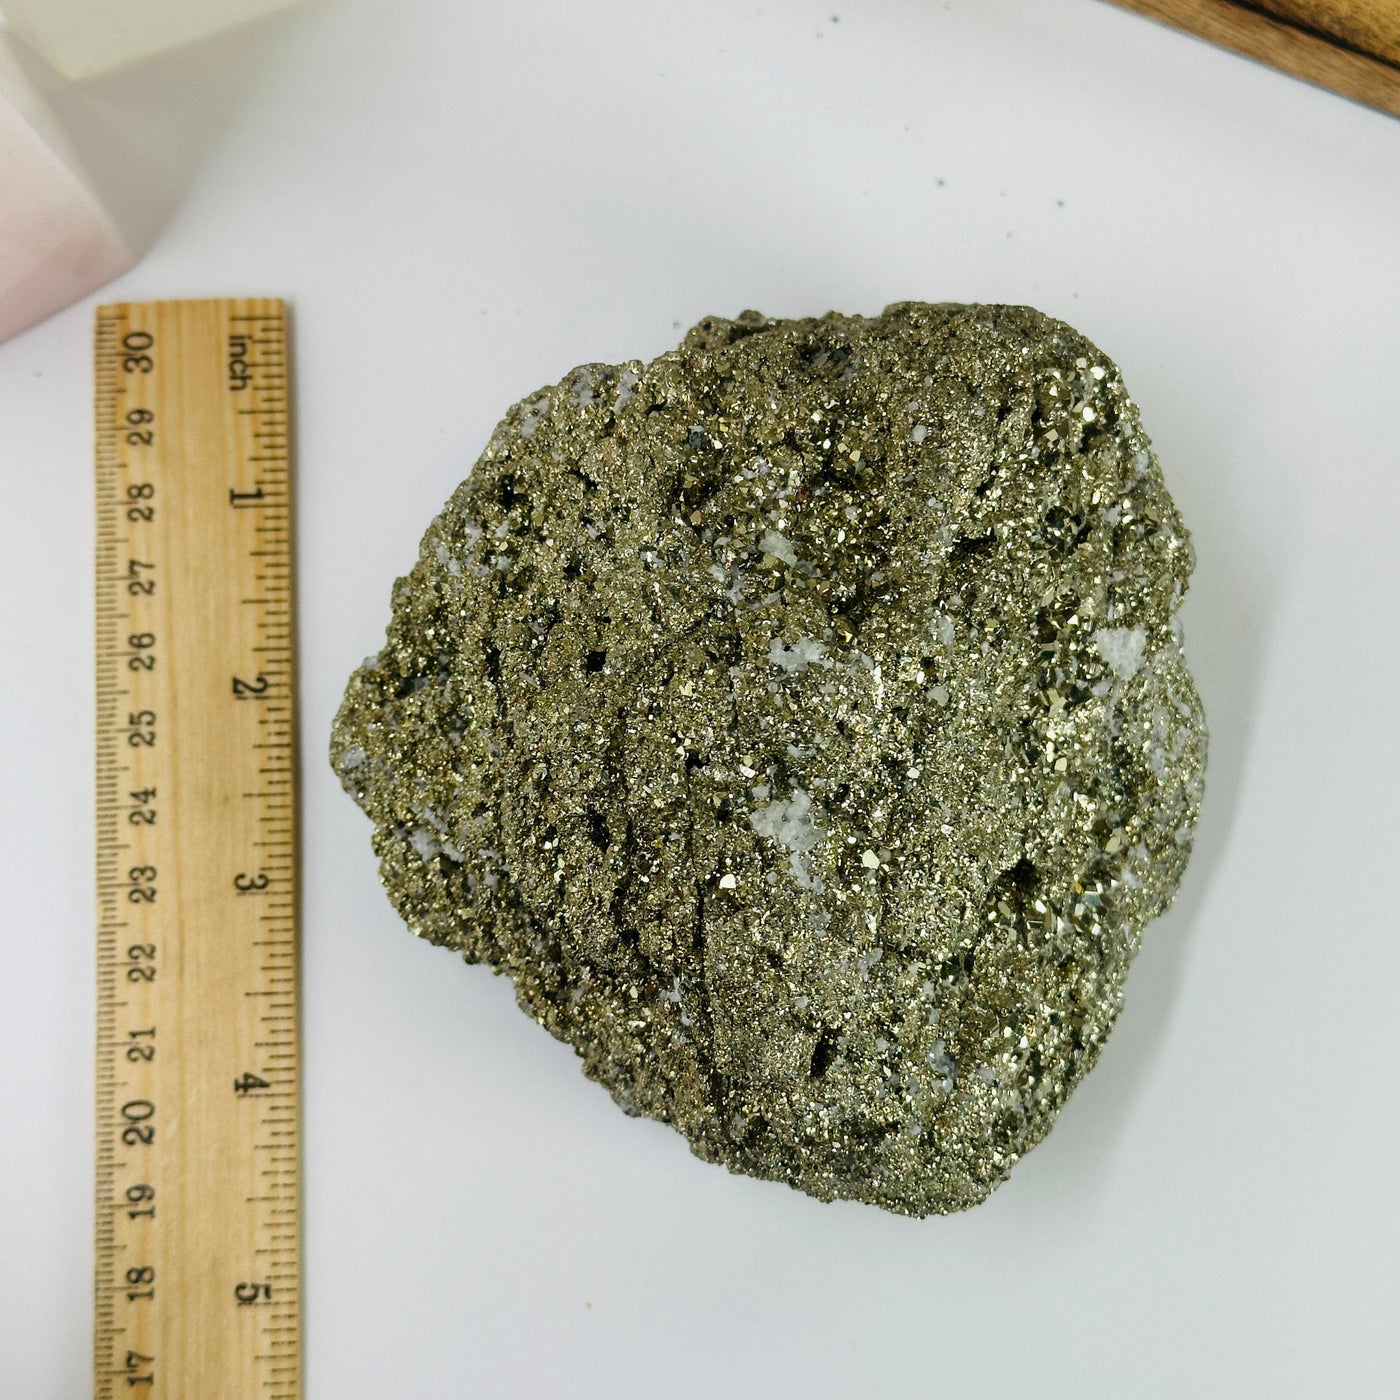 pyrite cluster next to a ruler for size reference